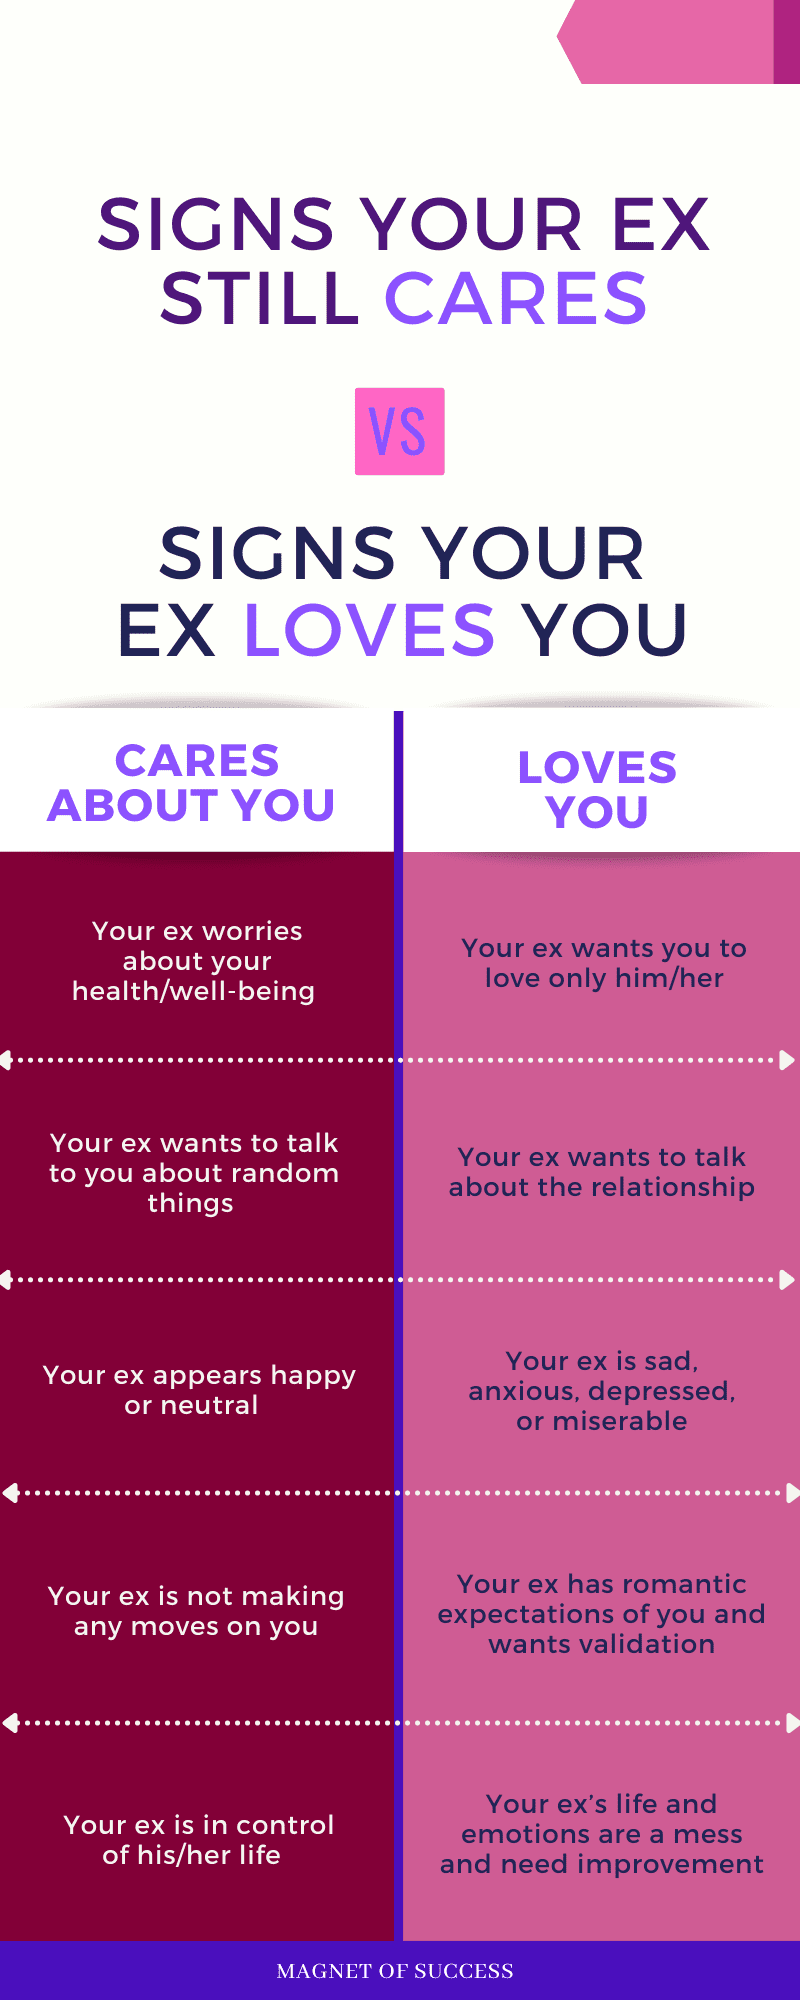 Signs your ex still cares about you